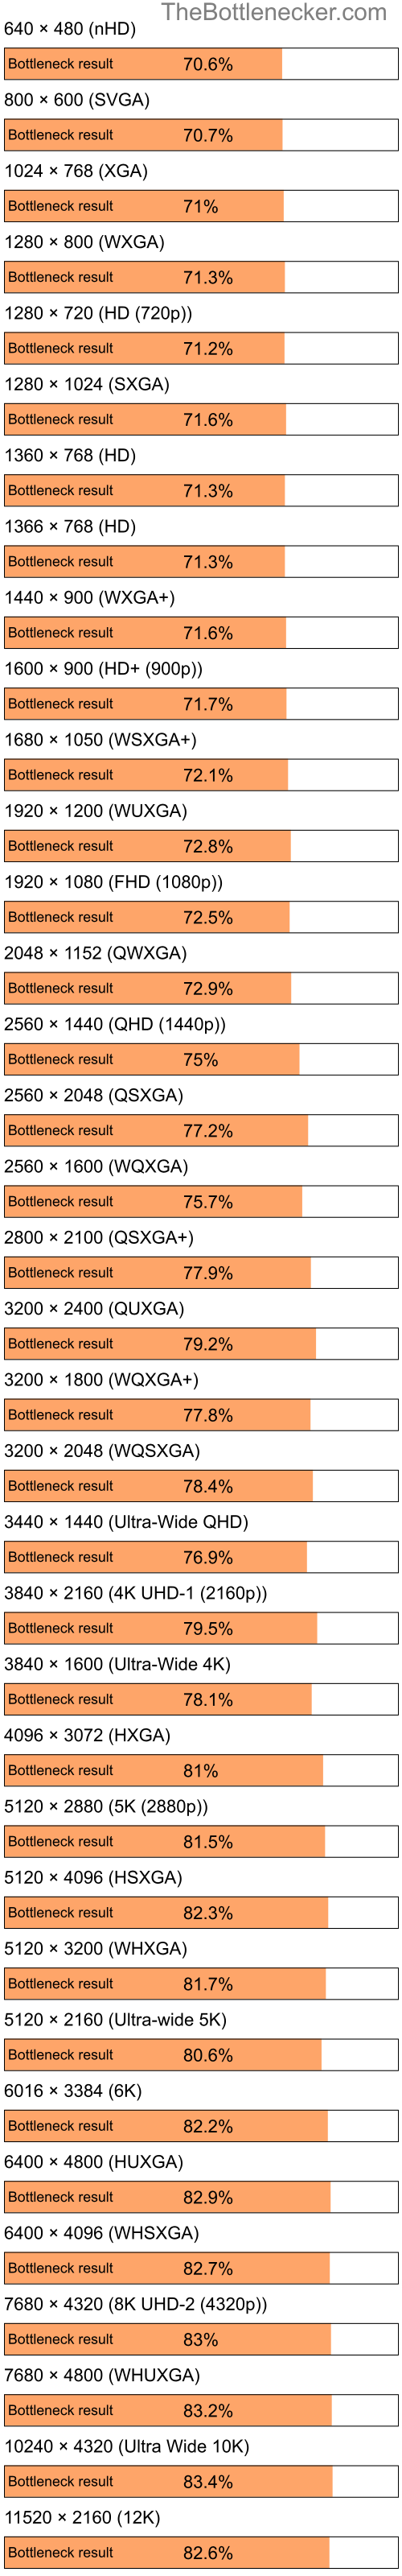 Bottleneck results by resolution for Intel Pentium 4 and AMD Radeon 9700 PRO in General Tasks